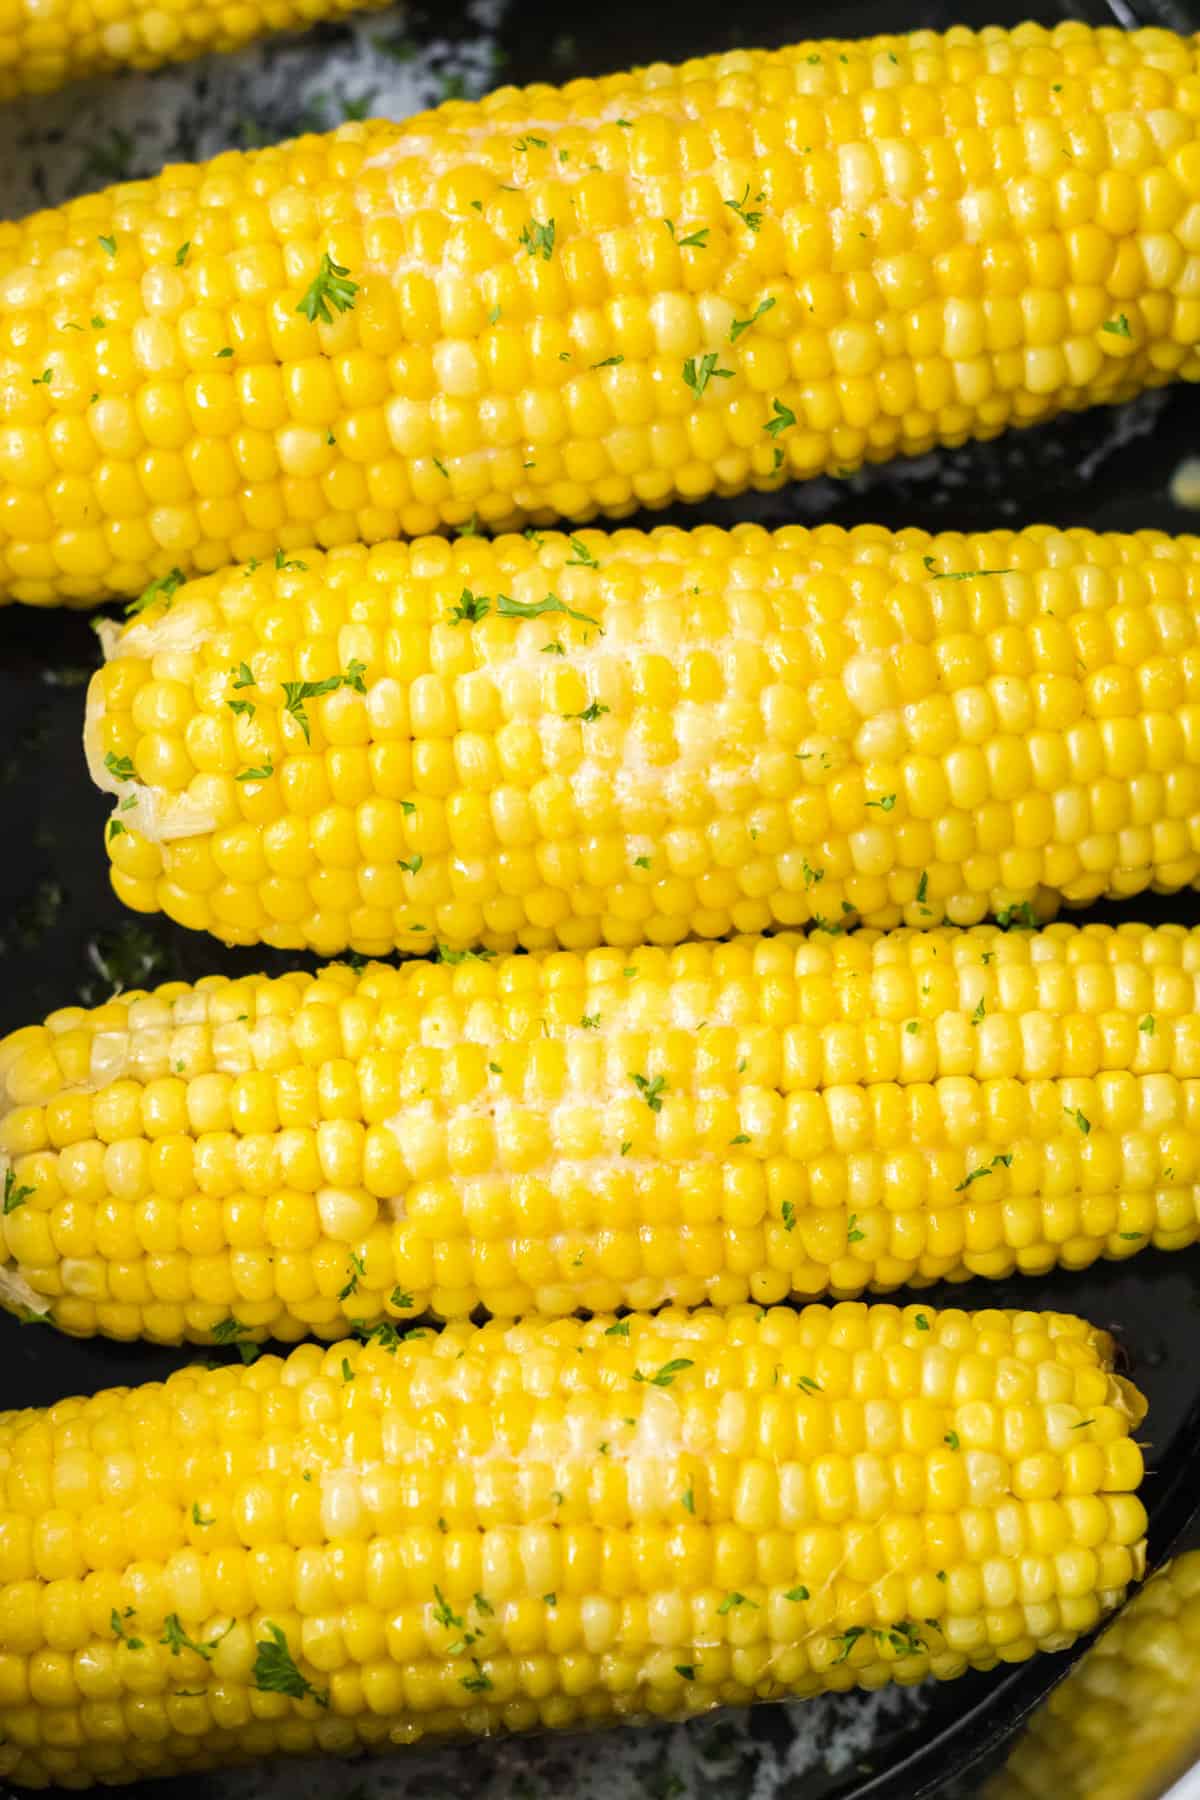 Perfectly cooked slow cooker corn on the cob.